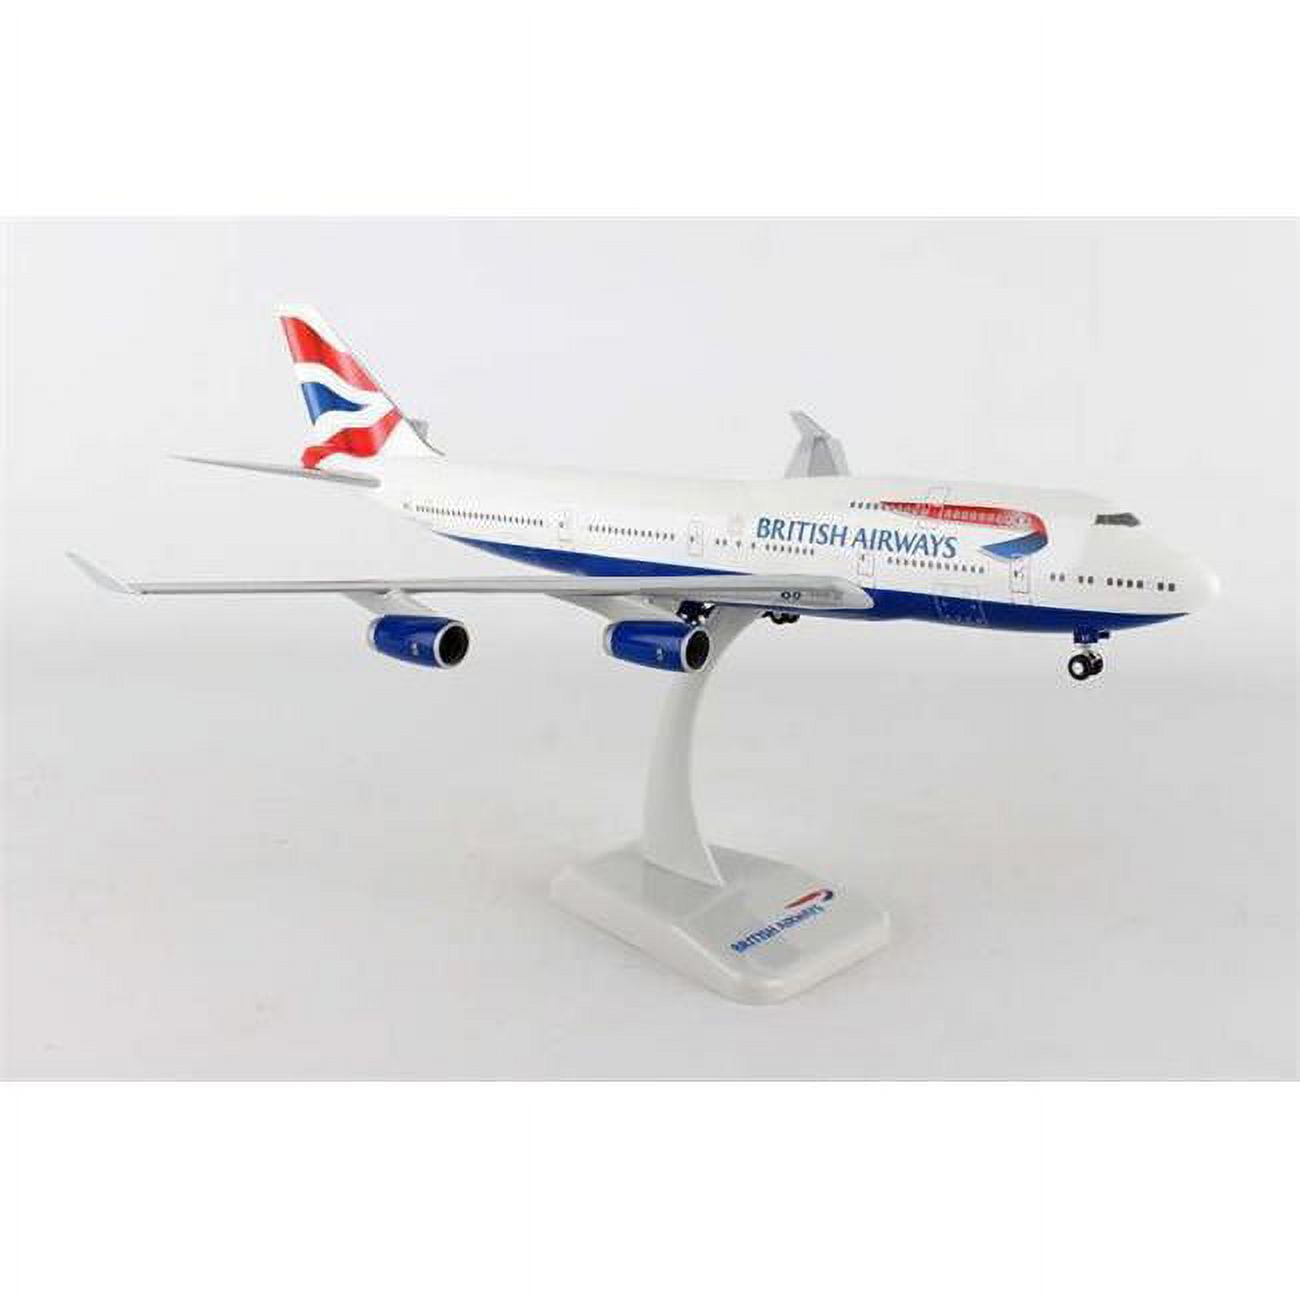 Hogan Wings 1-200 Commercial Models HG10192G British Airways Boeing 747-400  G-CIVY with gears 1-200 Model Airplane